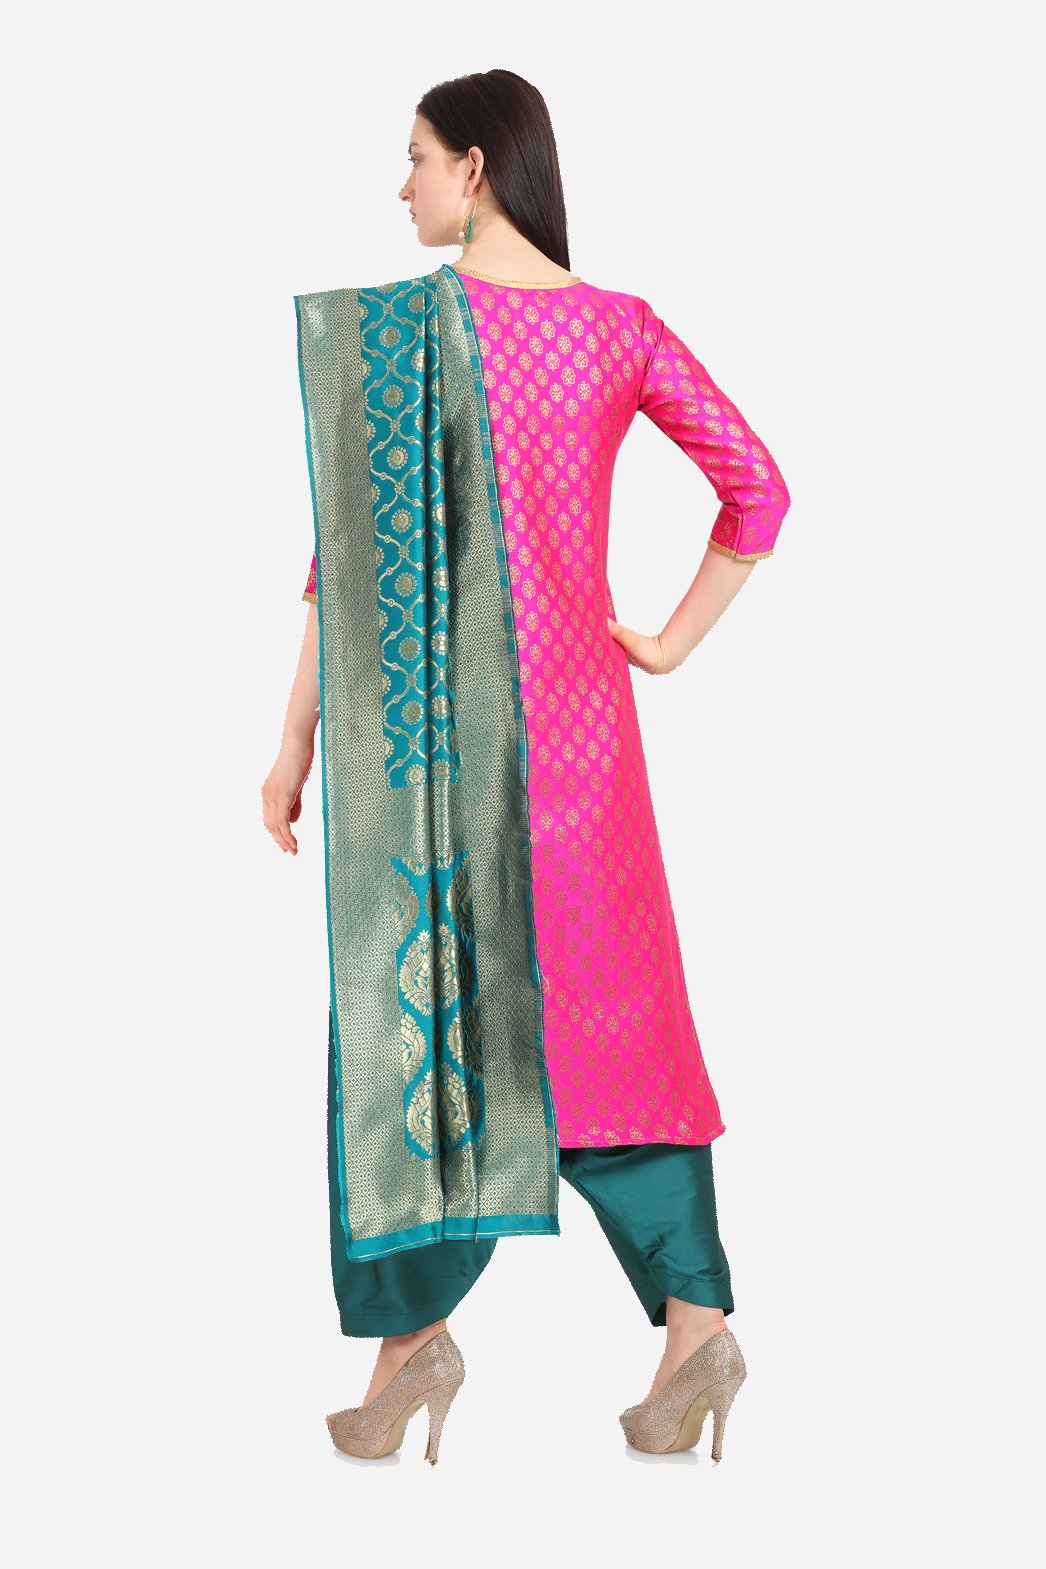 Pink And Green  Cotton  Jacquard Dress Material